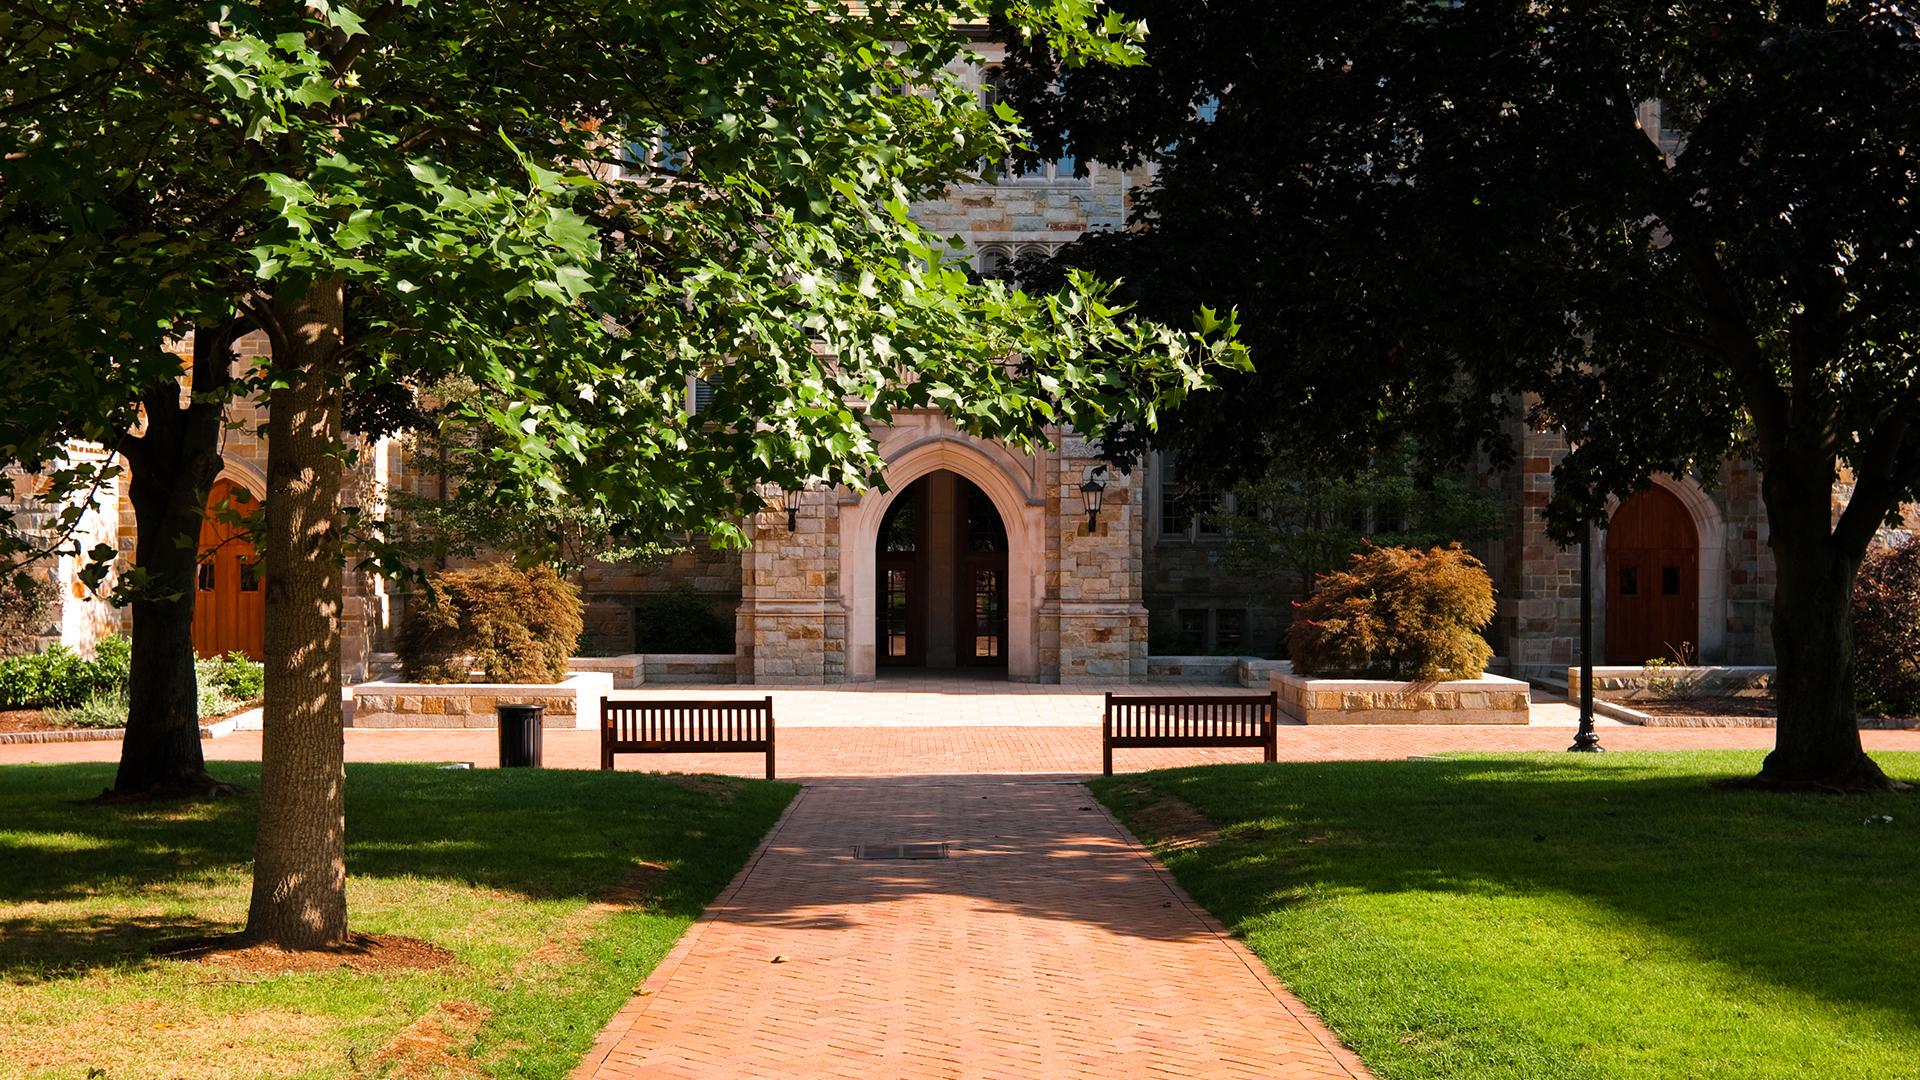 Brick walkway leading to educational building at Boston College